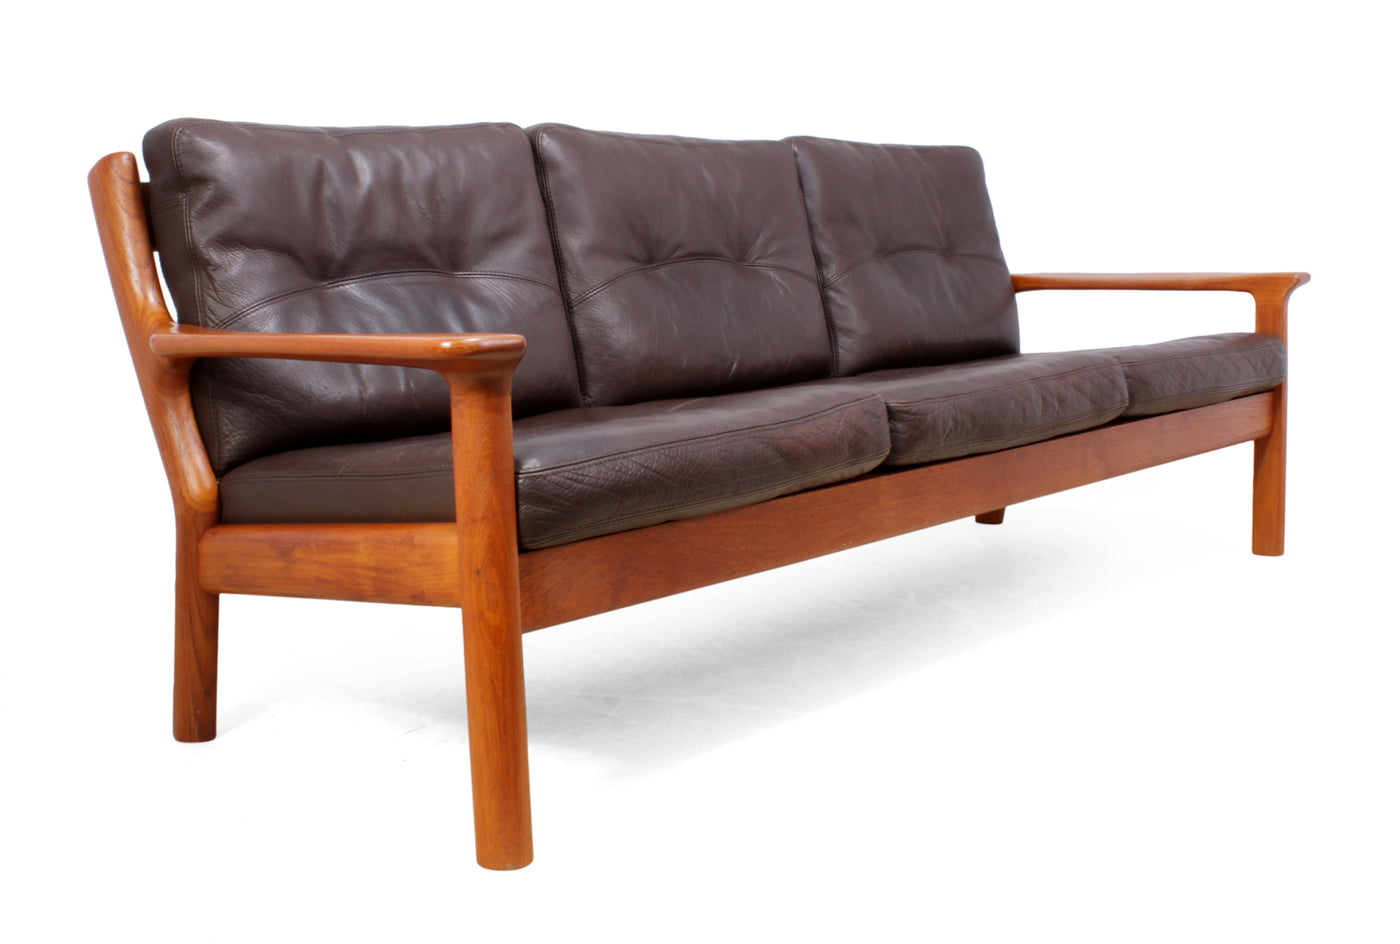 Mid Century Sofa in Teak and Leather by Glostrop